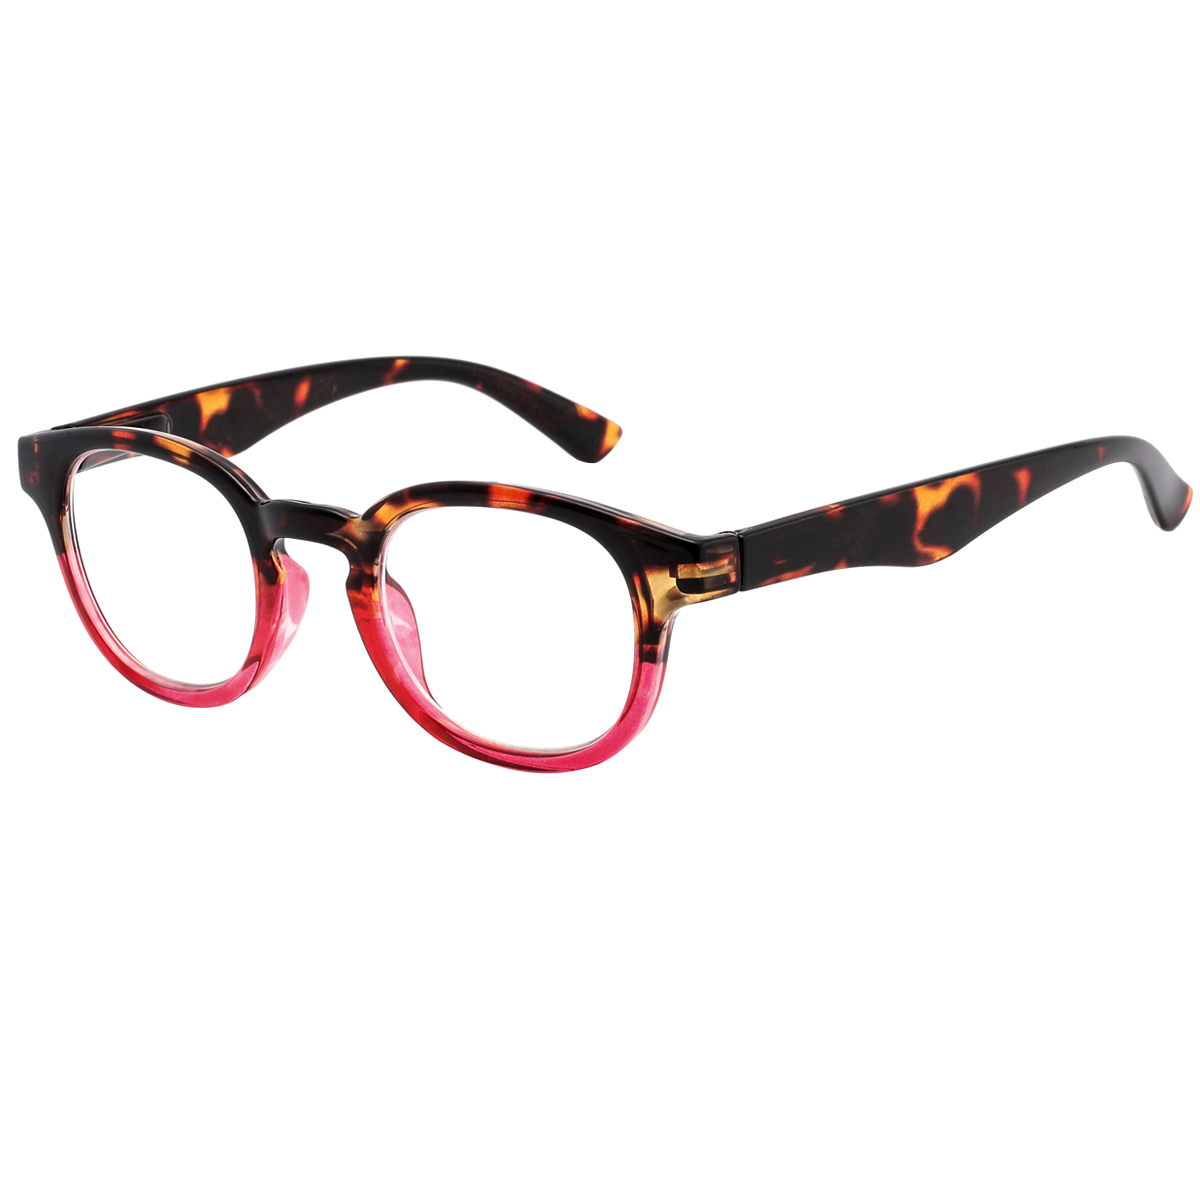 Juliet - Round Red Reading Glasses for Women